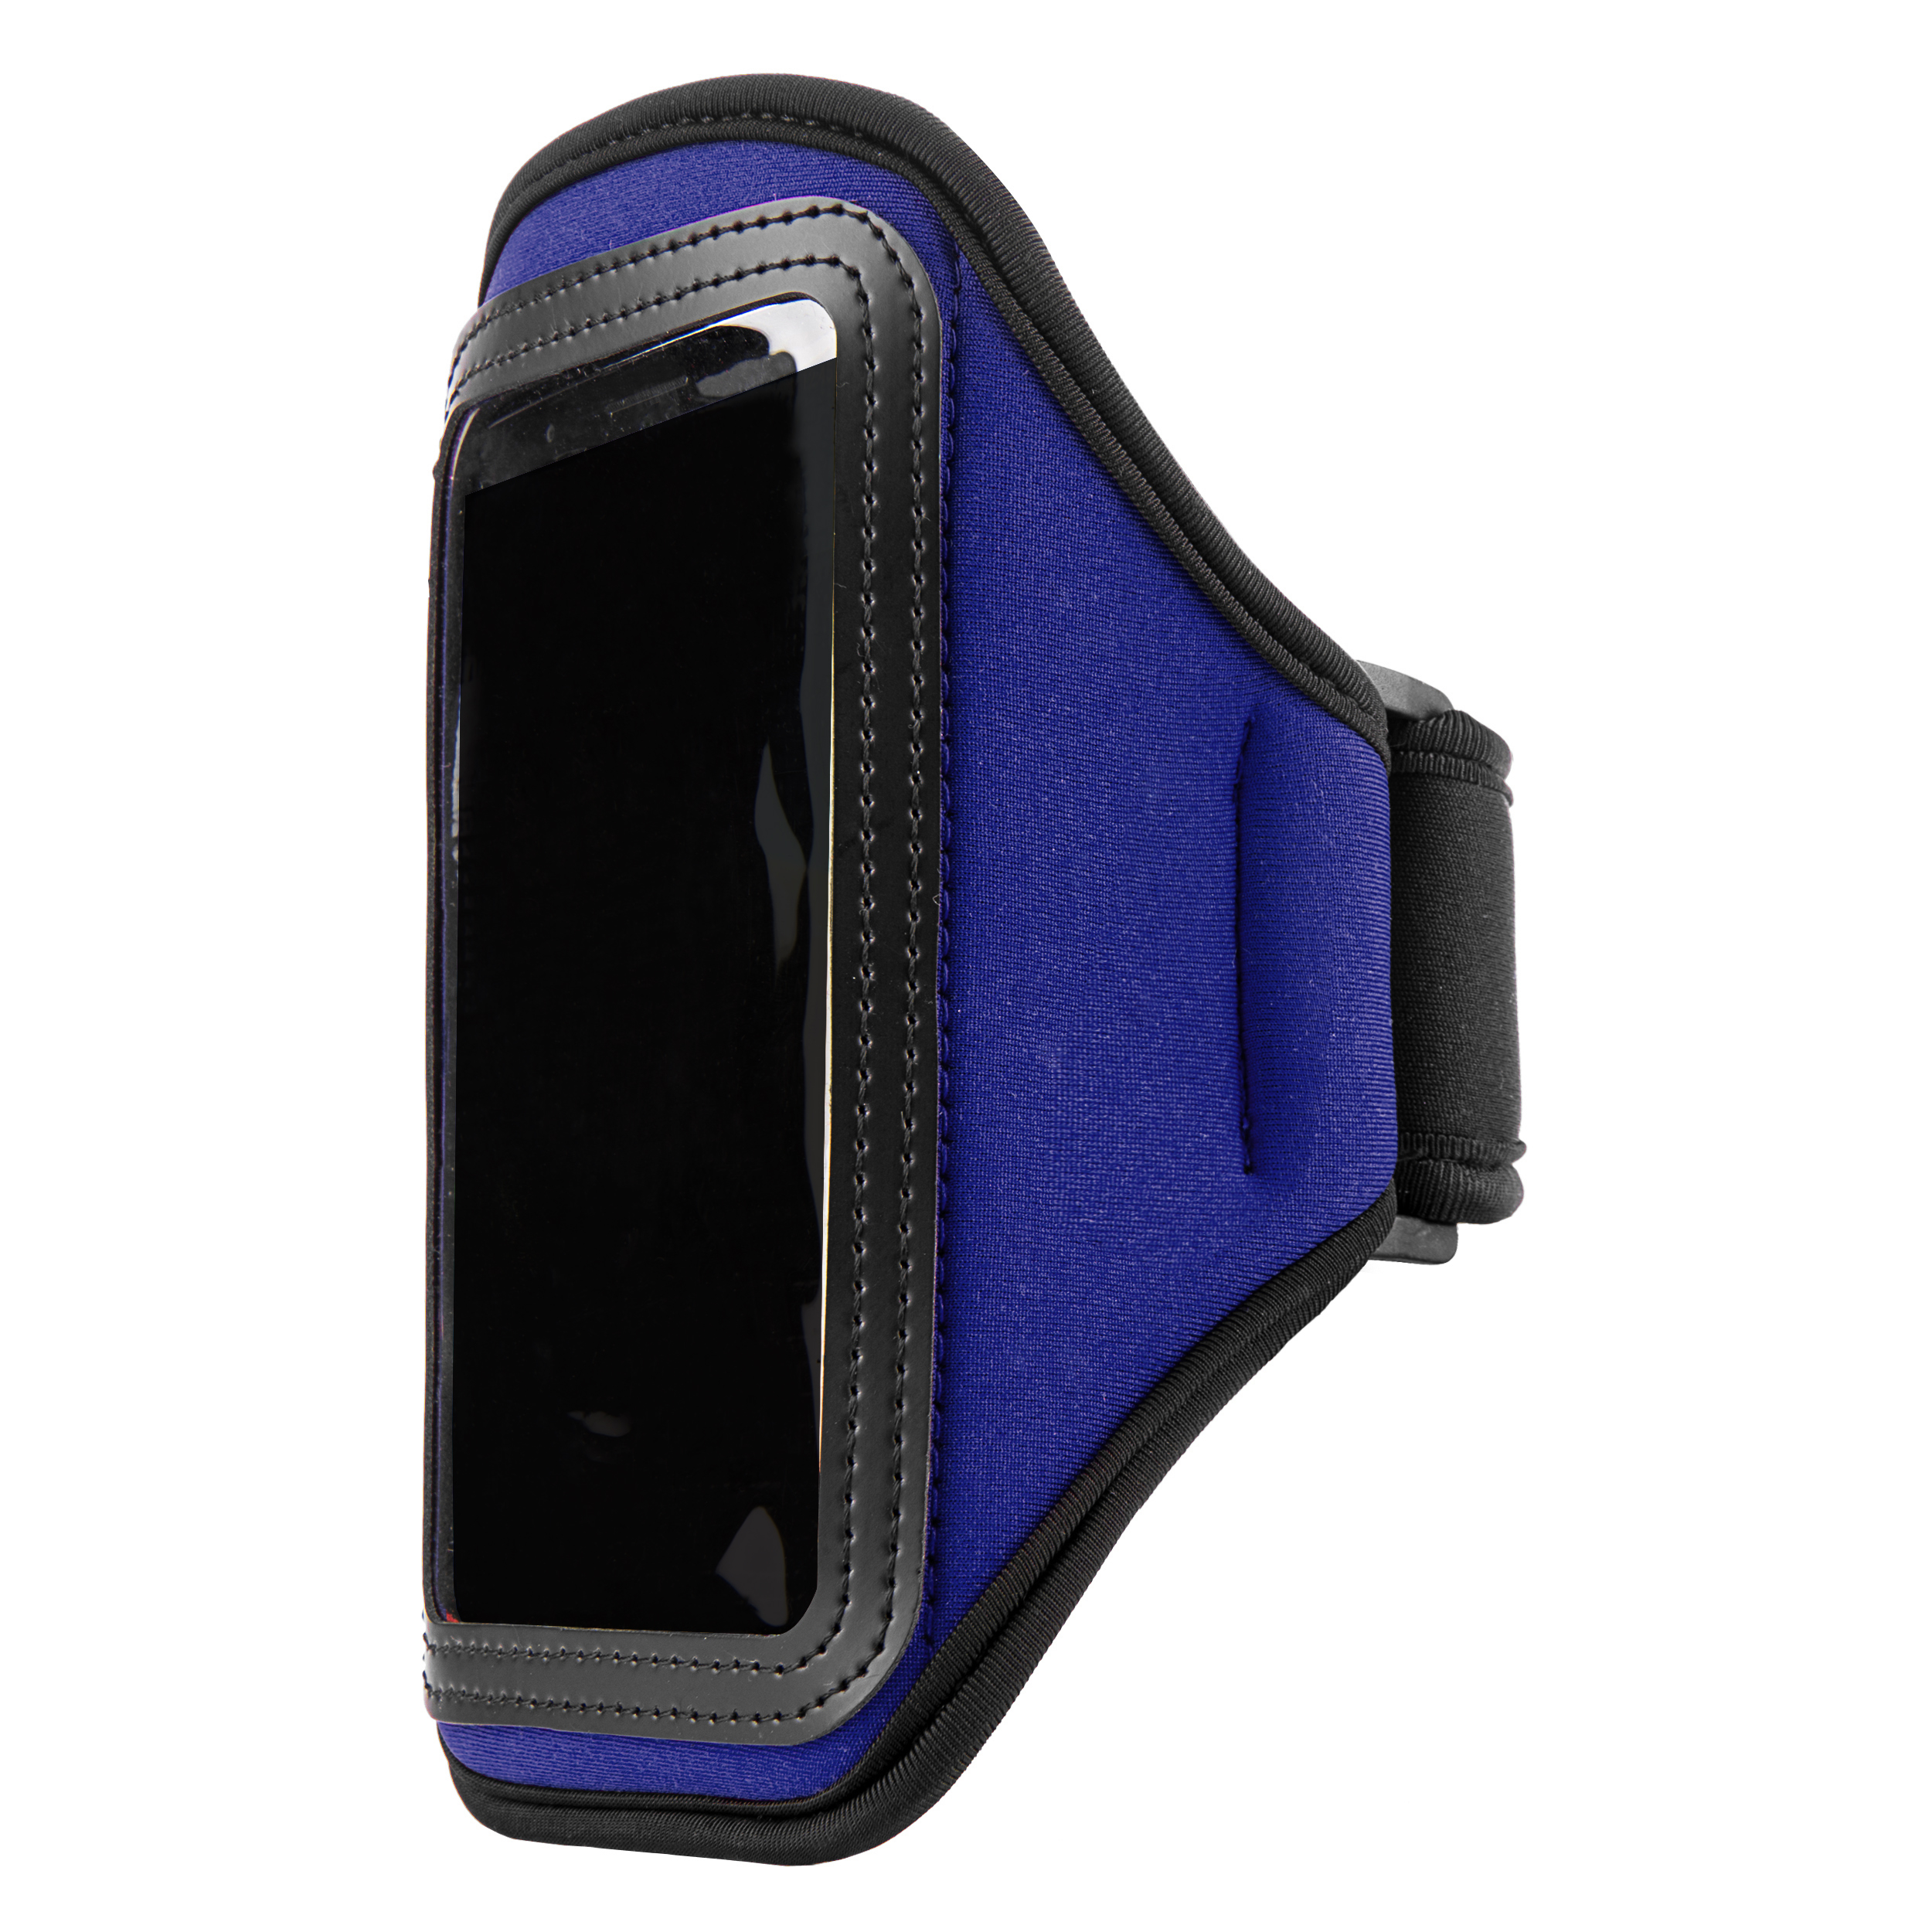 Running Gym Workouts Exercise Phone Armband for Apple iPhone 11/ Xs / 8 / 7 - image 1 of 8